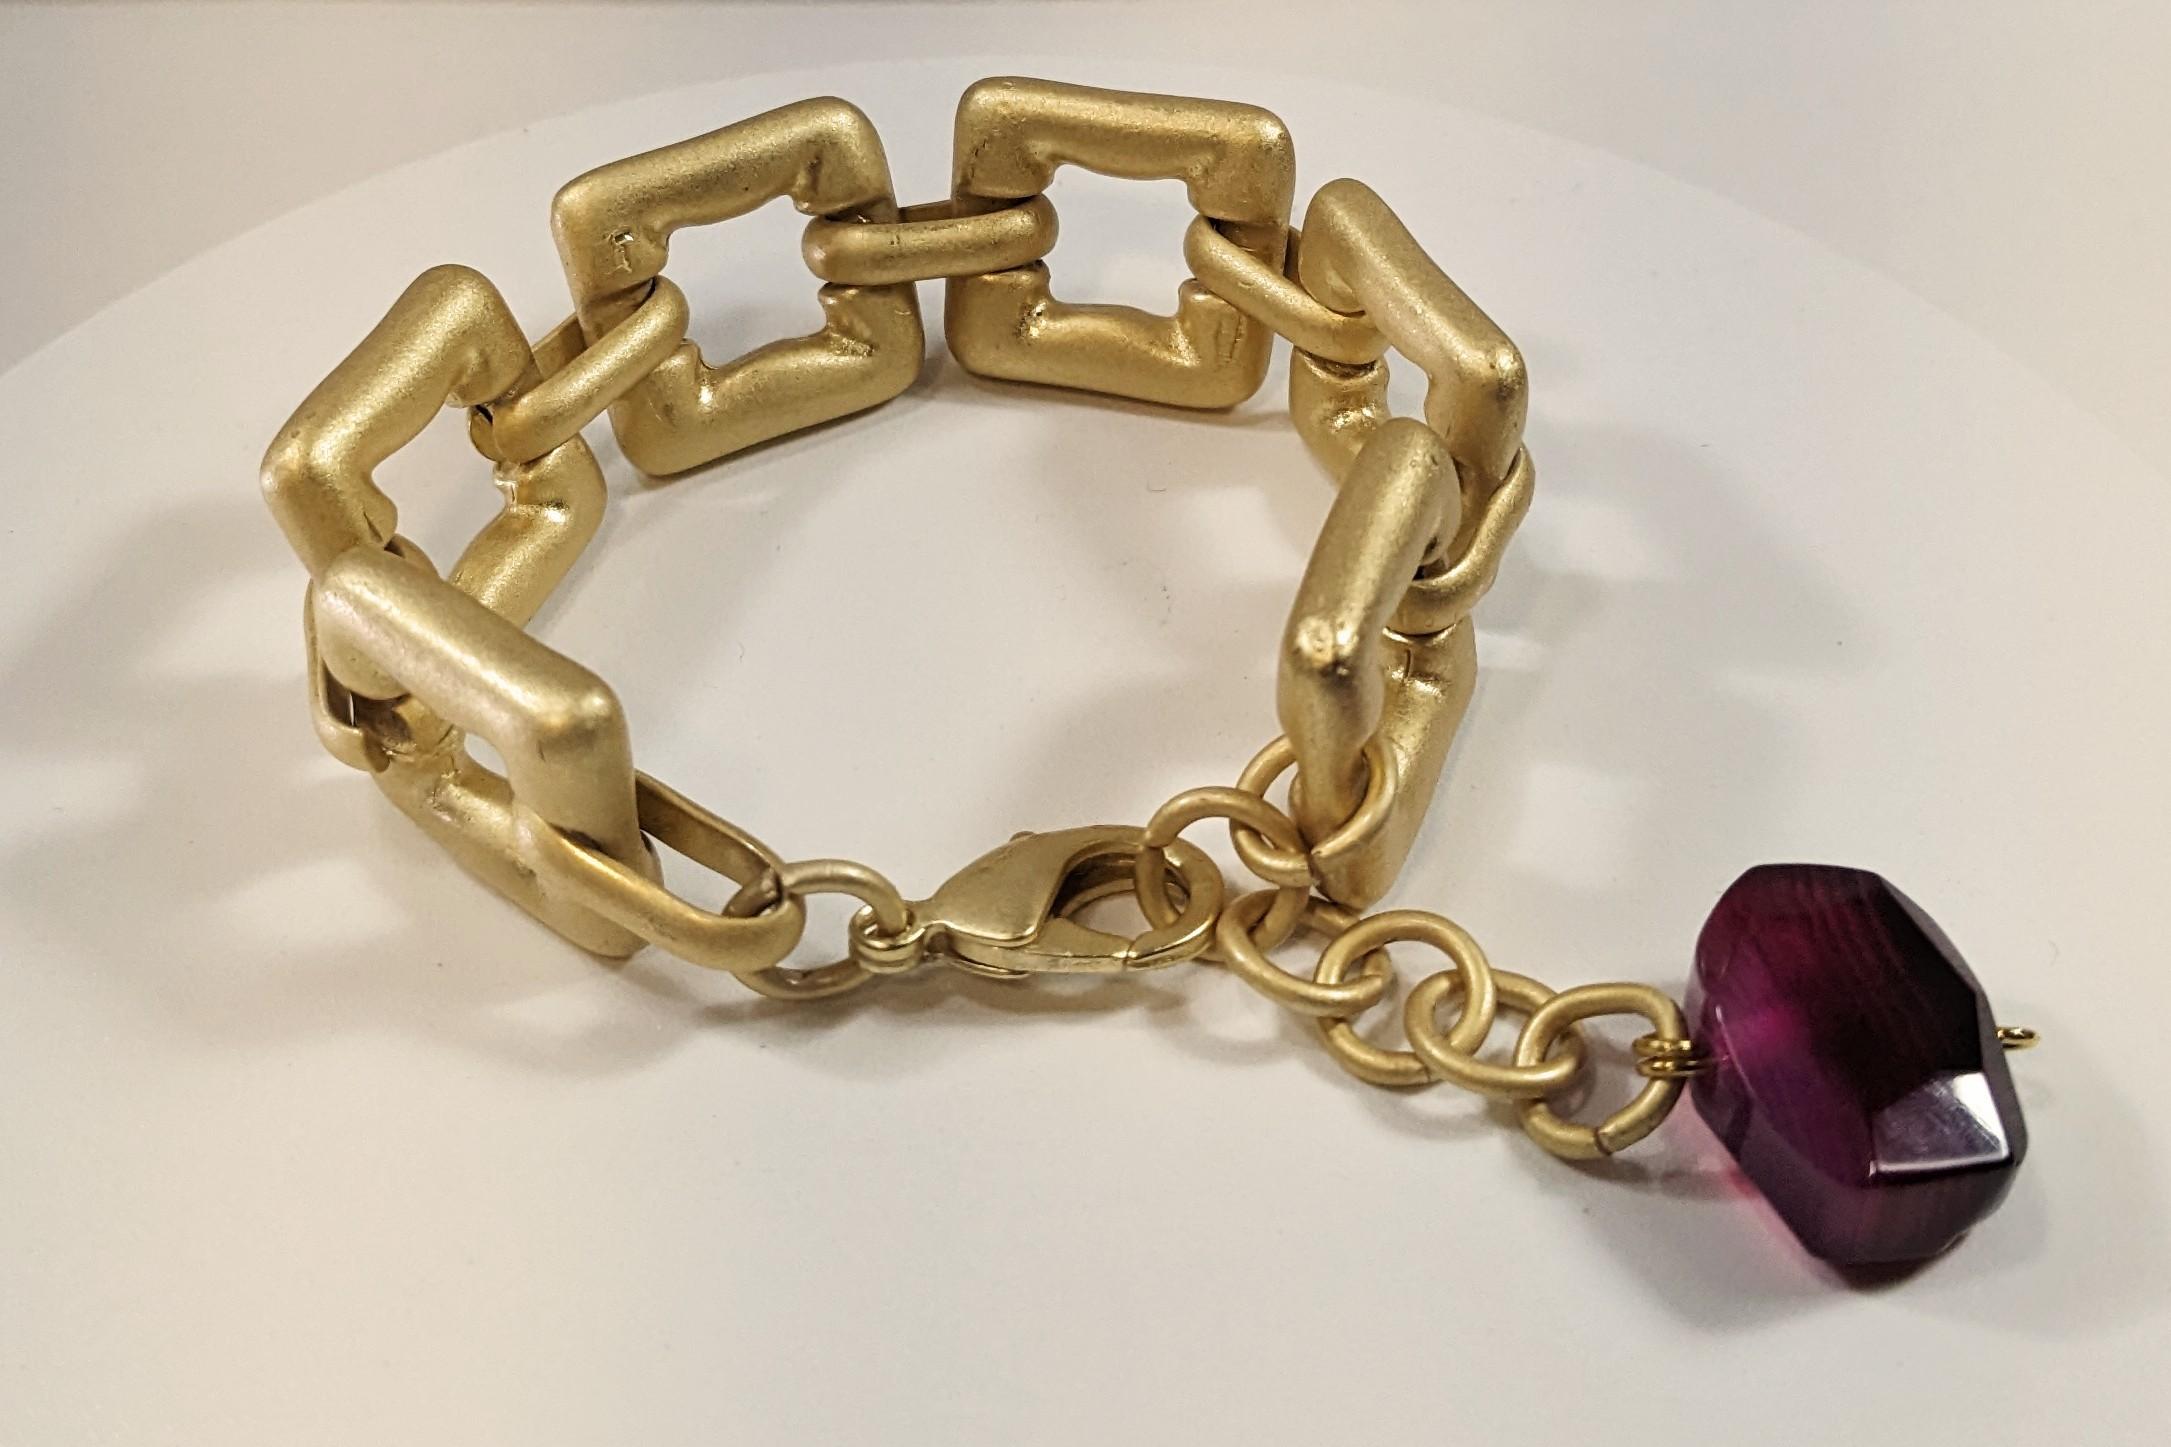  Square Chain Bracelet with Agates and Lobster Clasp
Bracelet length  16 cm (6,29 inches)
Chain length  3 cm (1,18 inches)
Weight 62 grams


Pradera Fashion Division  is specialized in European Fashion designers, clothing, handbags, accessories and